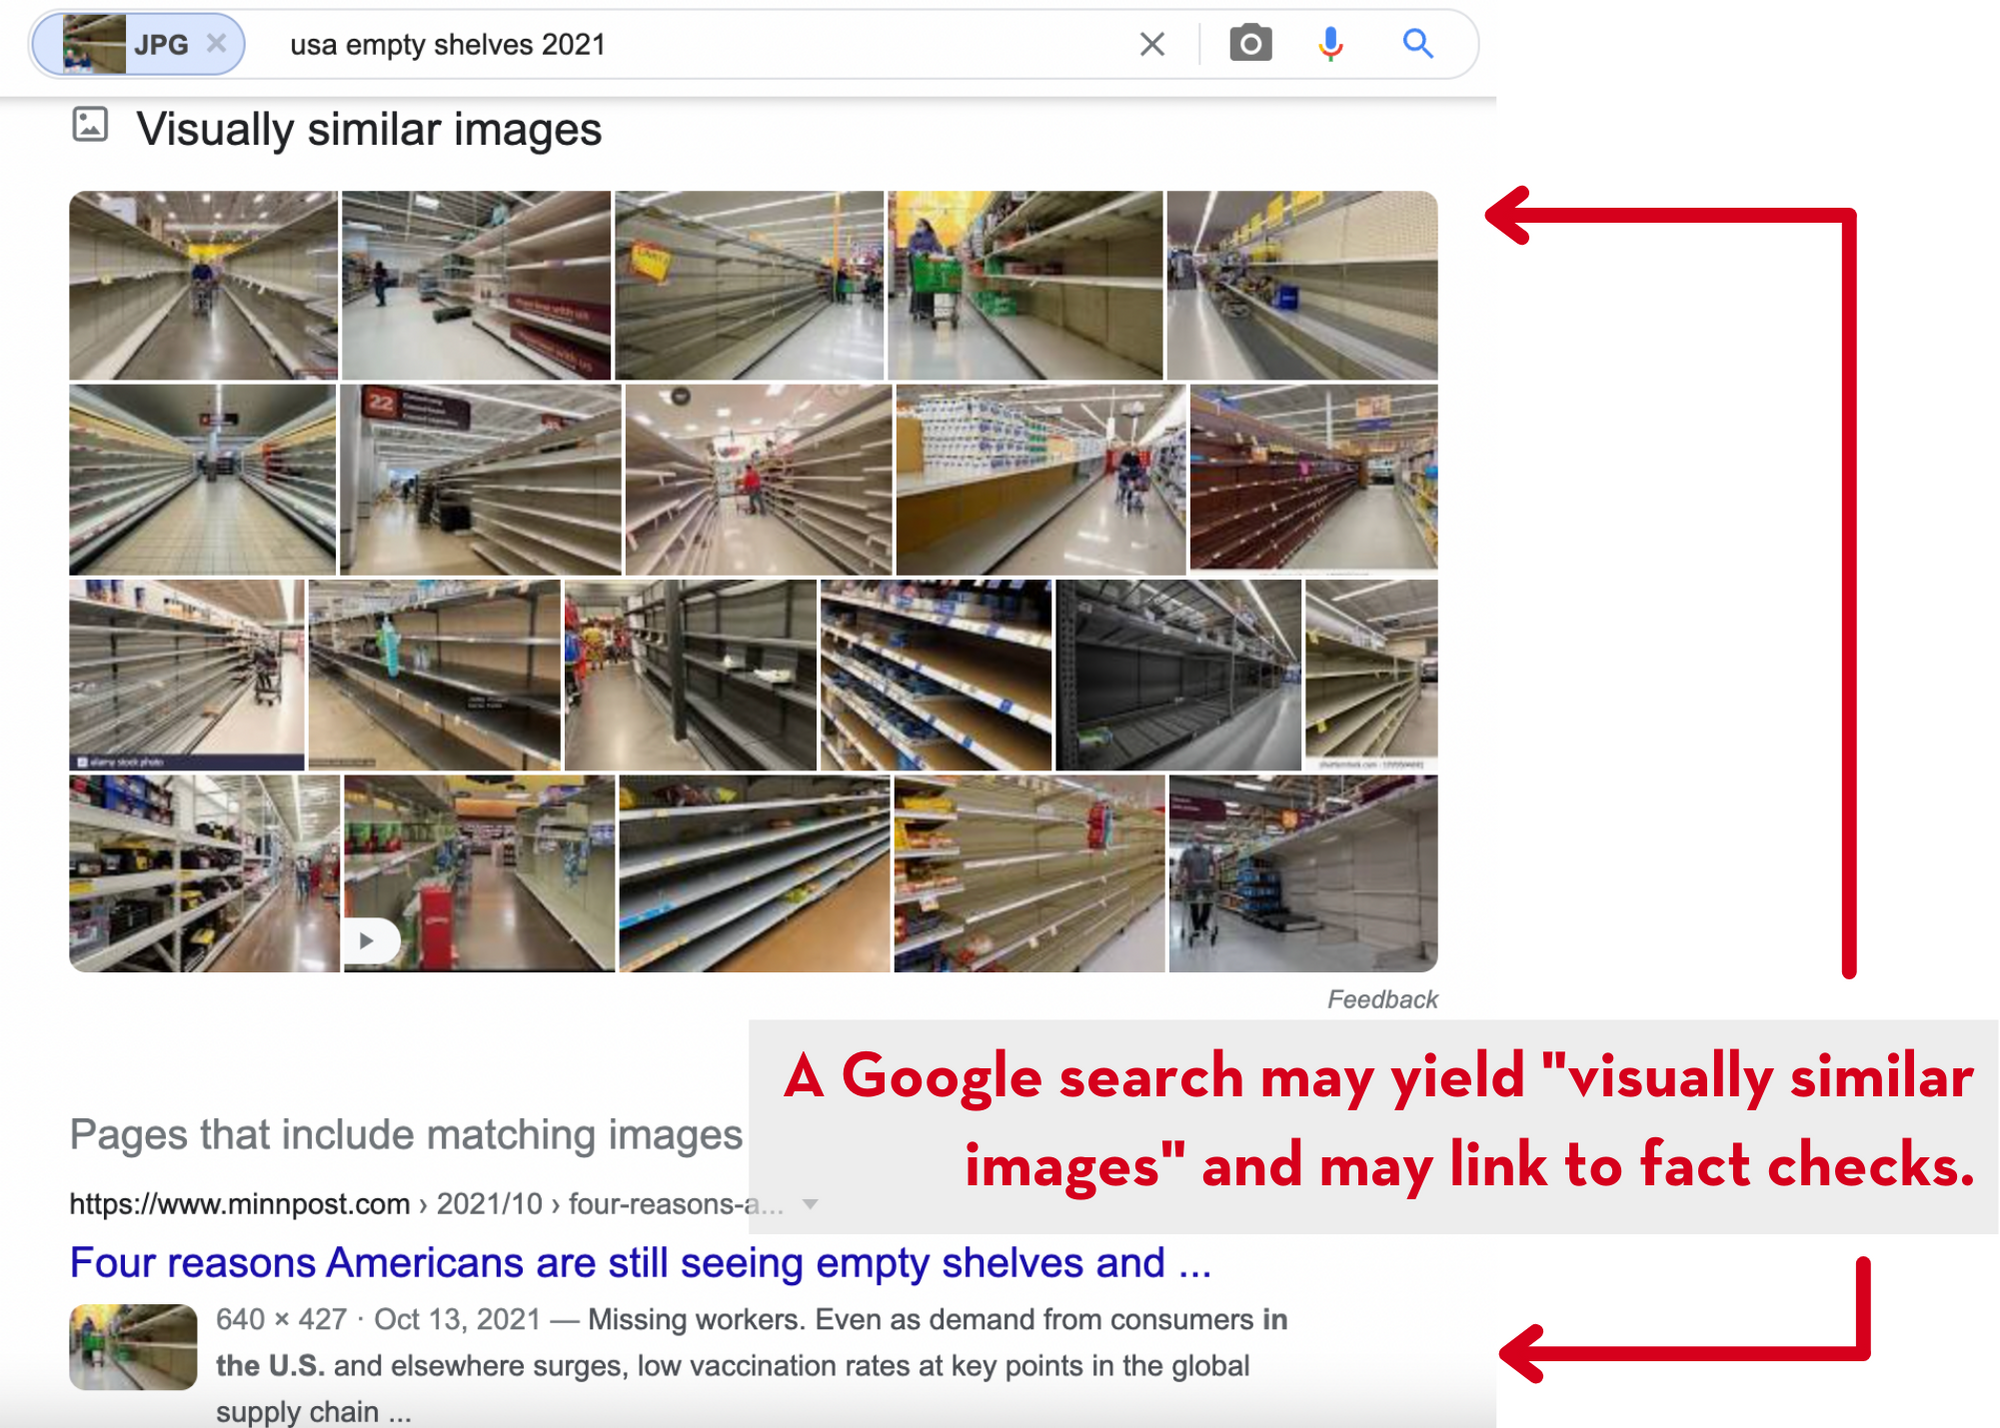 Page showing reverse image search results of "usa empty shelves 2021"